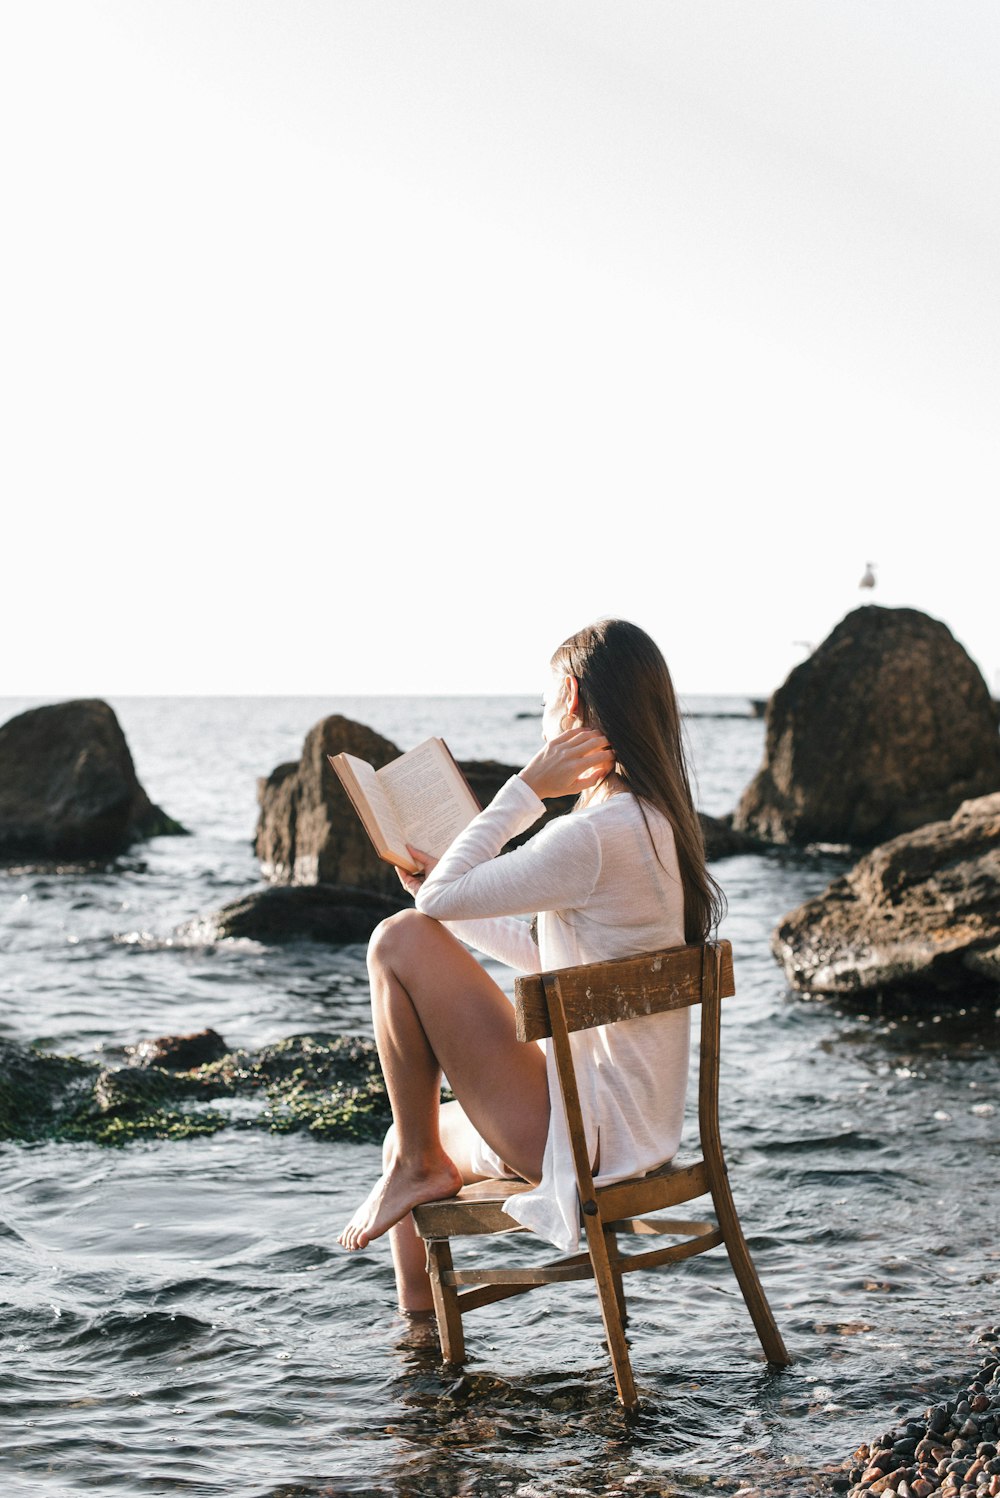 woman in white dress sitting on brown wooden chair reading book on beach during daytime